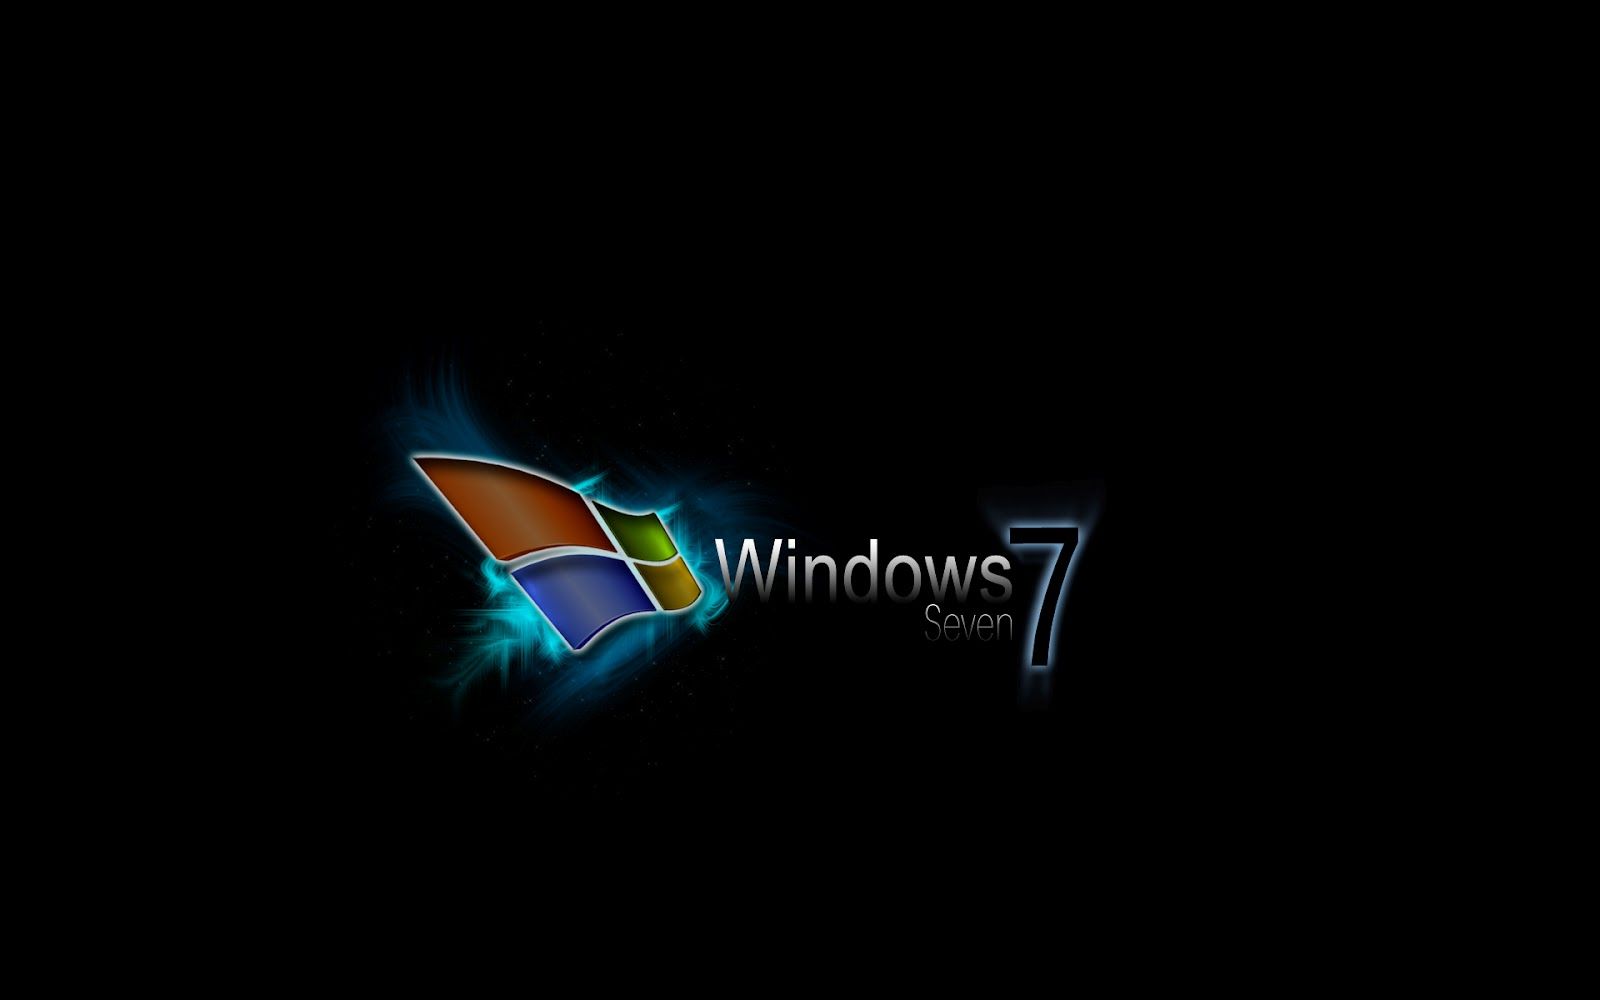 1600x1000px Gif Wallpapers Windows 7 | #380814